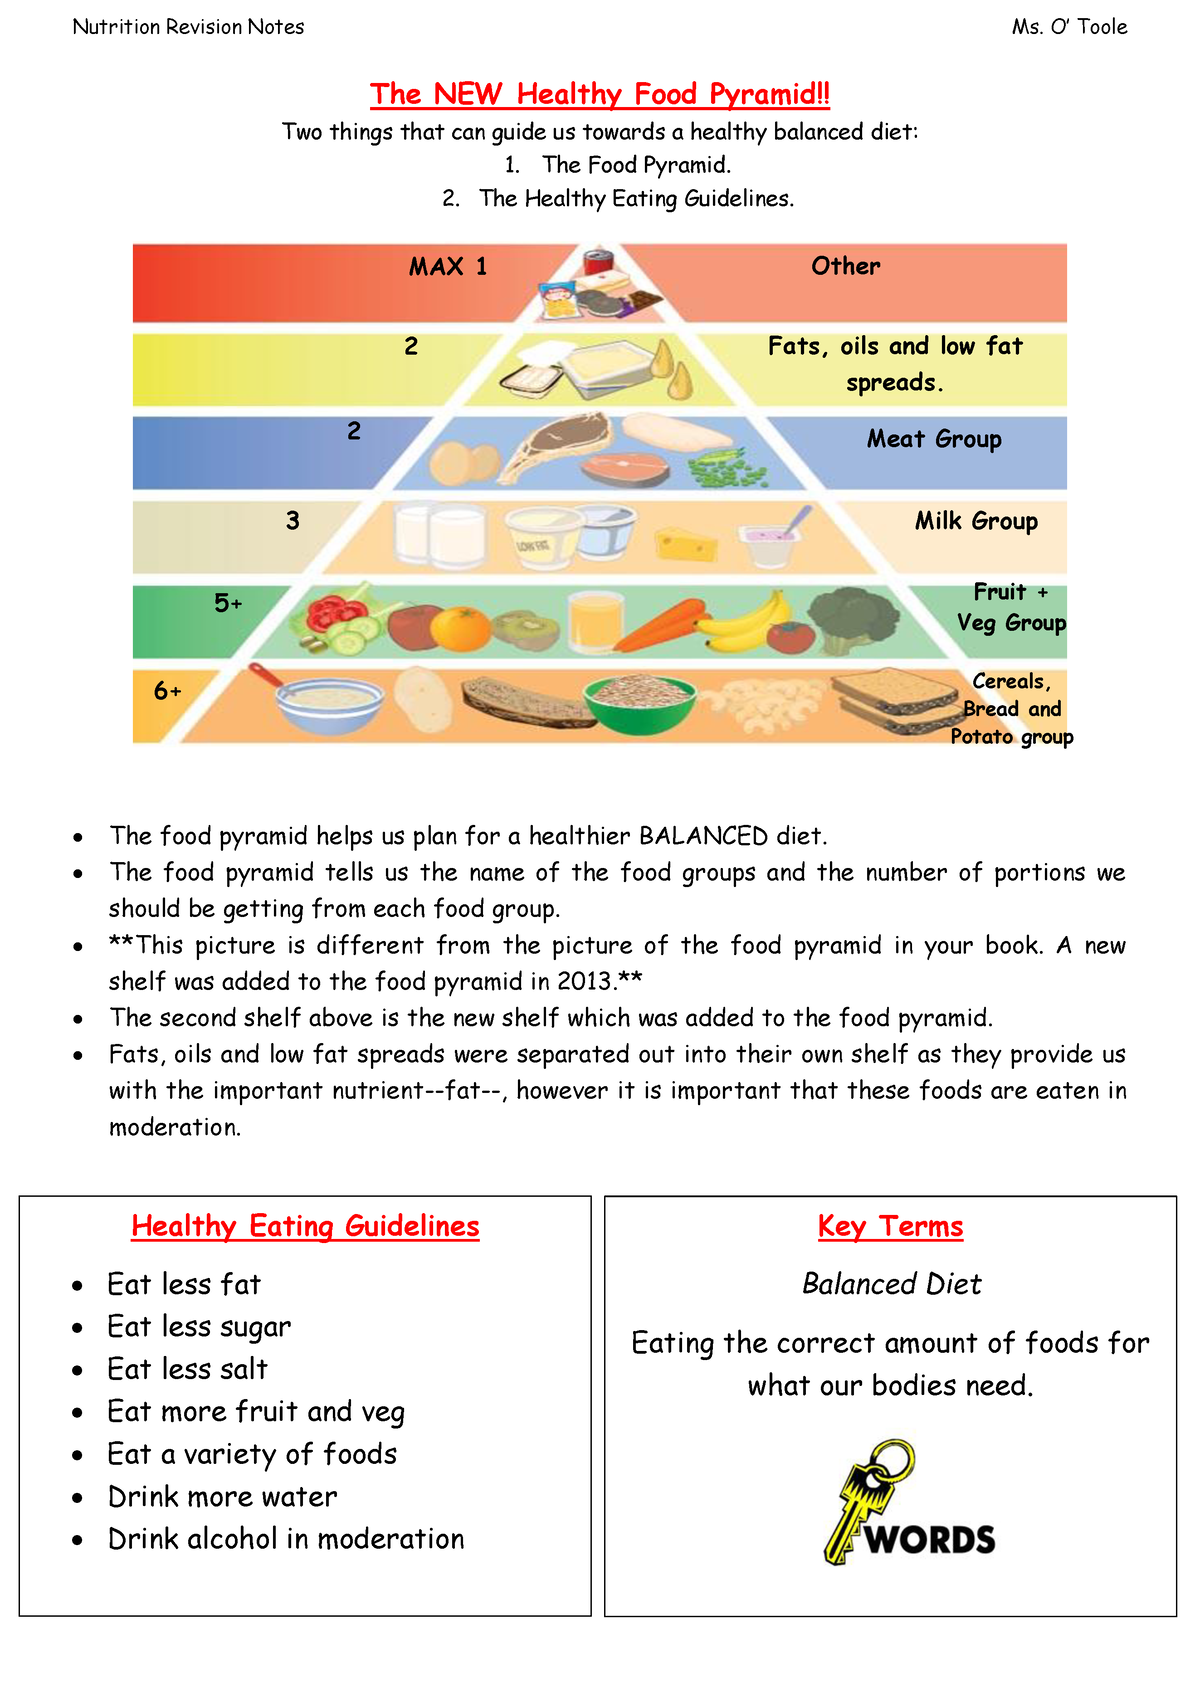 Centre for Health Protection - The Food Pyramid – A Guide to a Balanced Diet